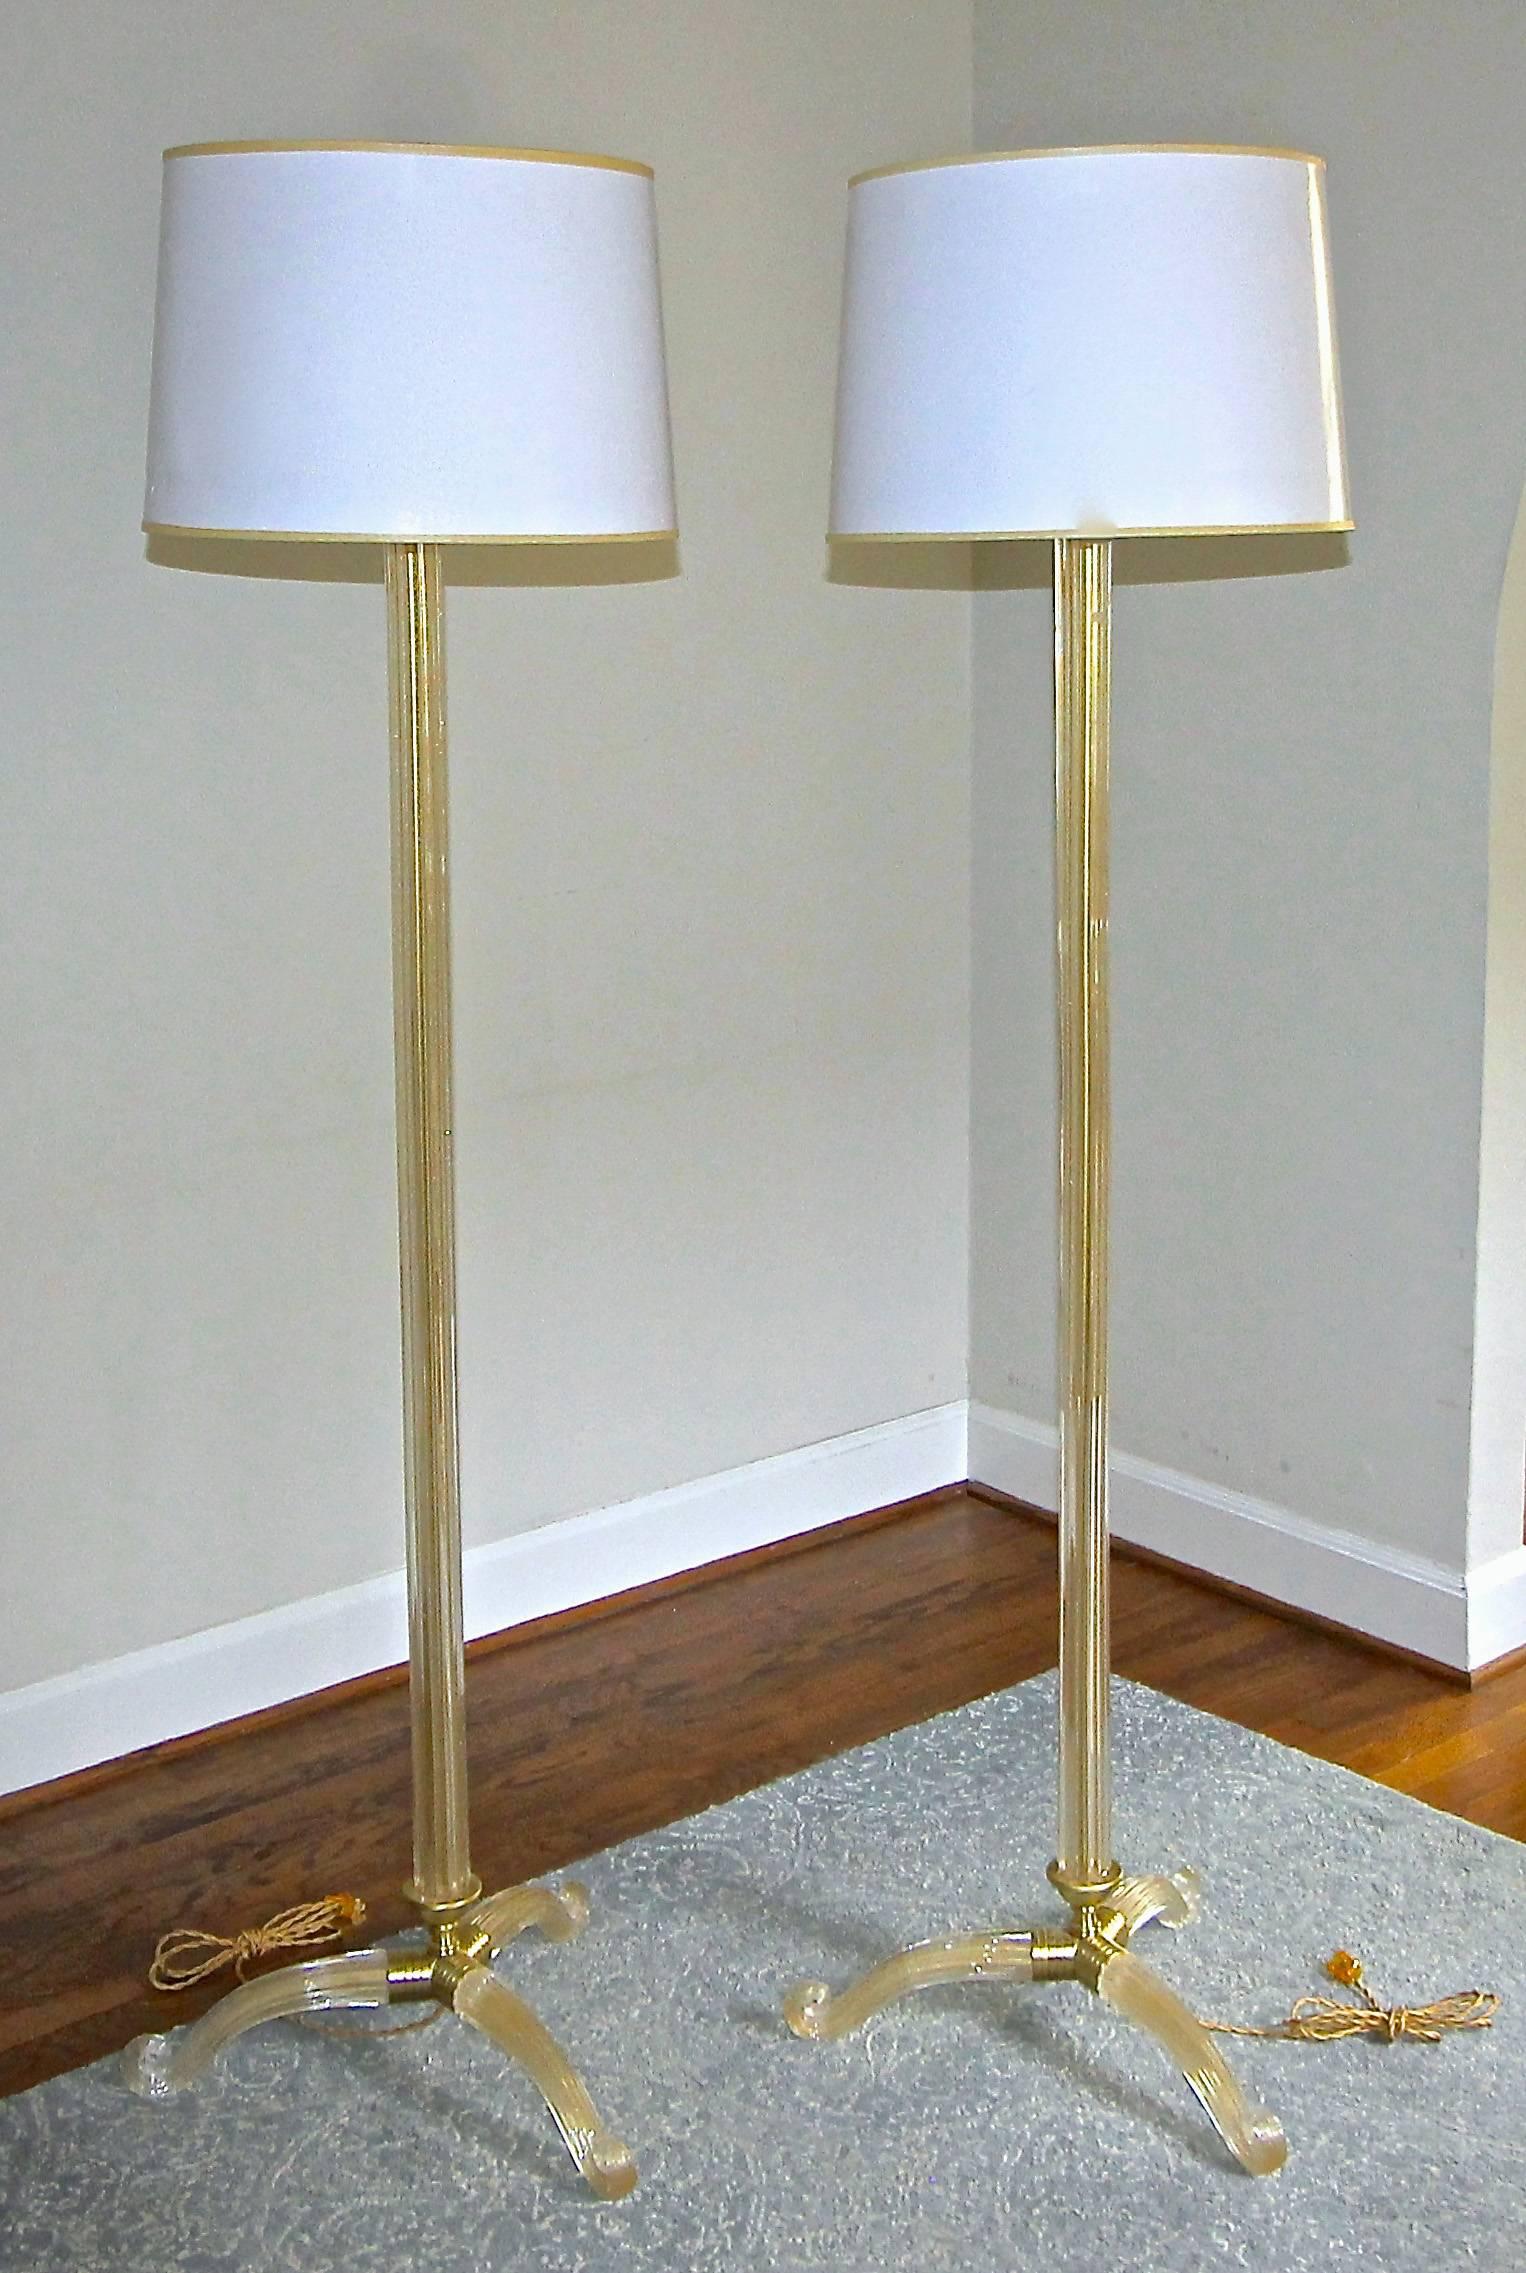 Pair of Italian Venetian handblown clear and gold inclusion floor lamps with tripod bases by Barovier & Toso. Beautifully detailed brass fittings and hardware. The tall glass centre rod is reeded and rests on 3 scrolling curved legs. Newly wired for